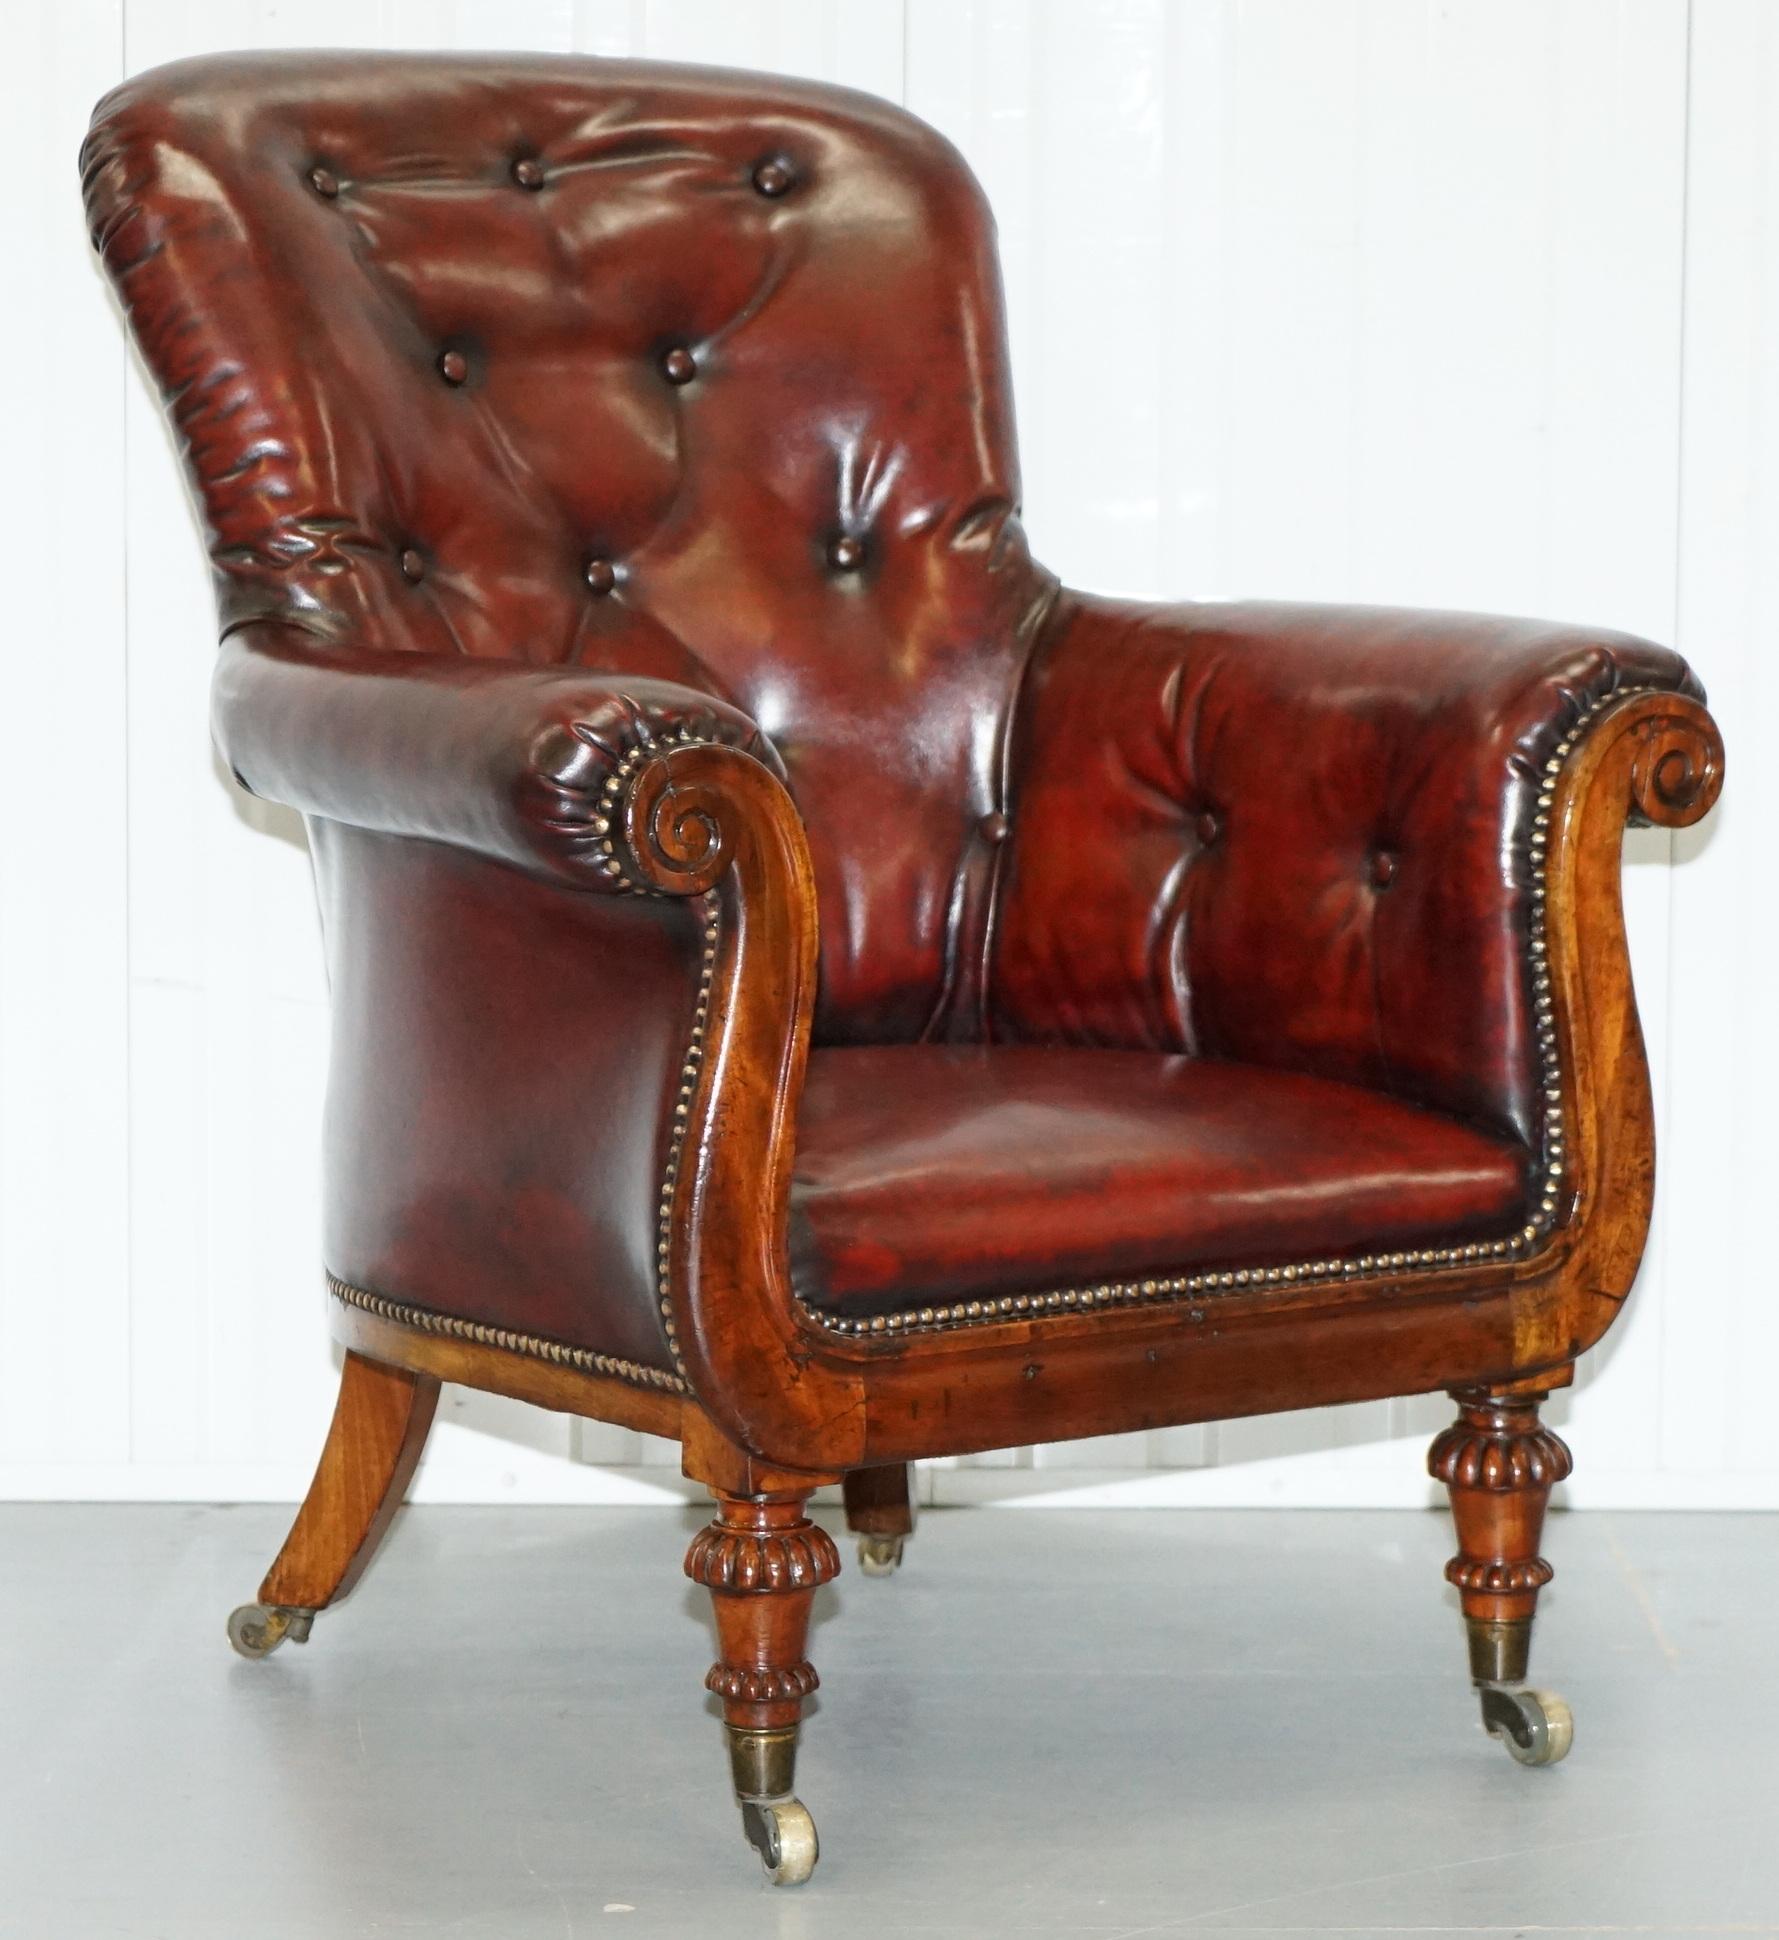 We are delighted to offer for sale this absolutely stunning fully restored hand dyed Bordeaux leather period Regency mahogany Chesterfield Porters armchair in the manner of Gillows.

A very good looking and classily designed Regency piece, this